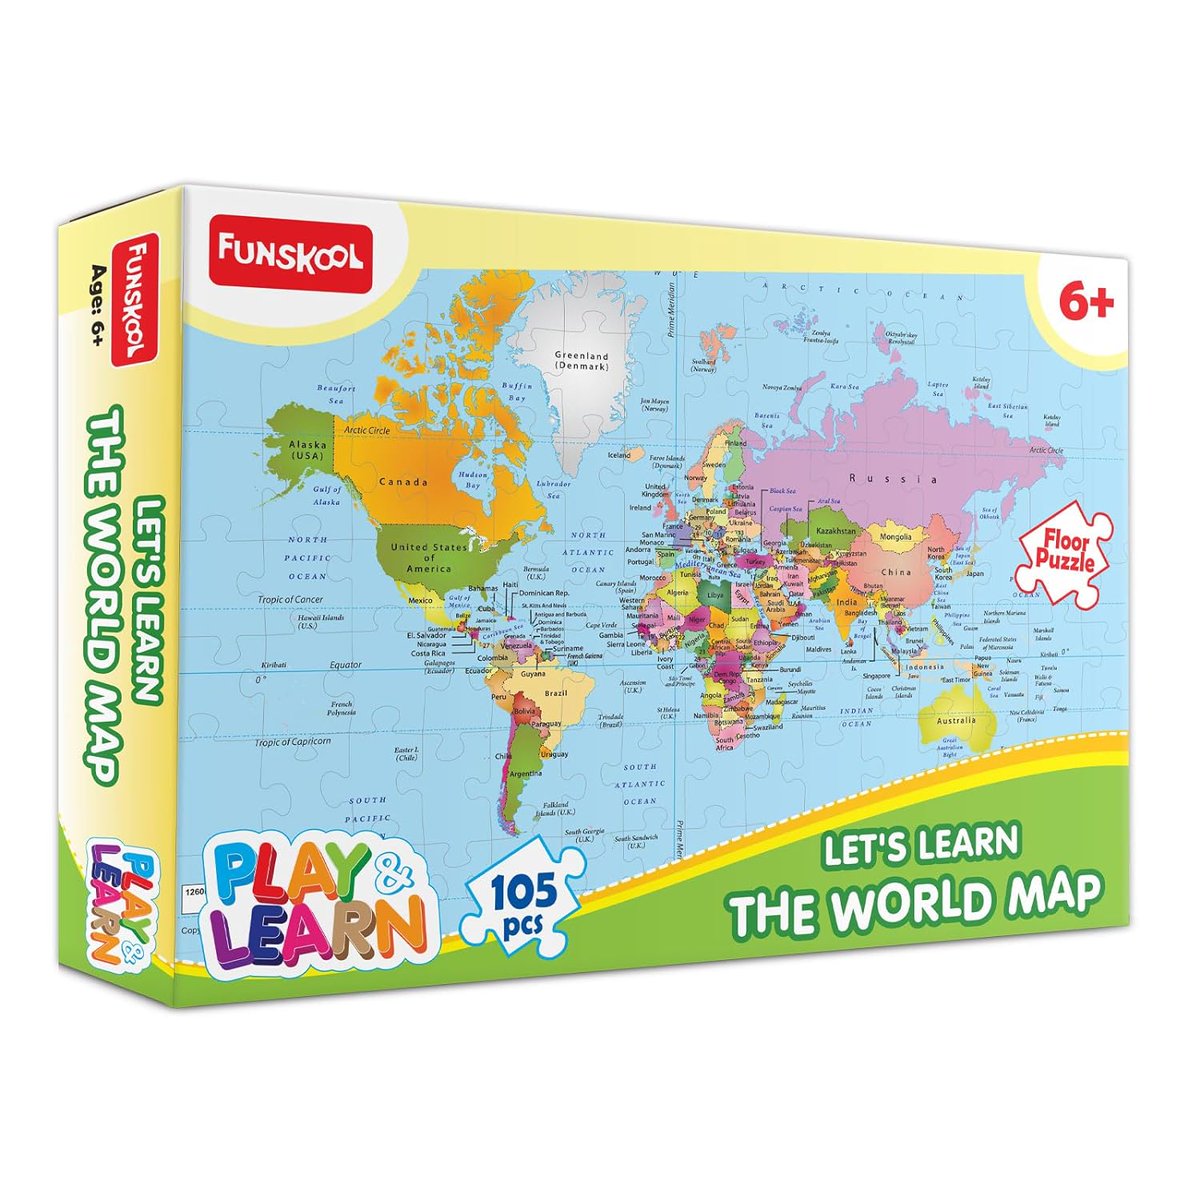 toyland.toys/product/funsko…

Funskool Play & Learn-World Map, Educational, 105 Pieces, Puzzle, For 6 Year Old Kids And Above
Price- ₹249.00